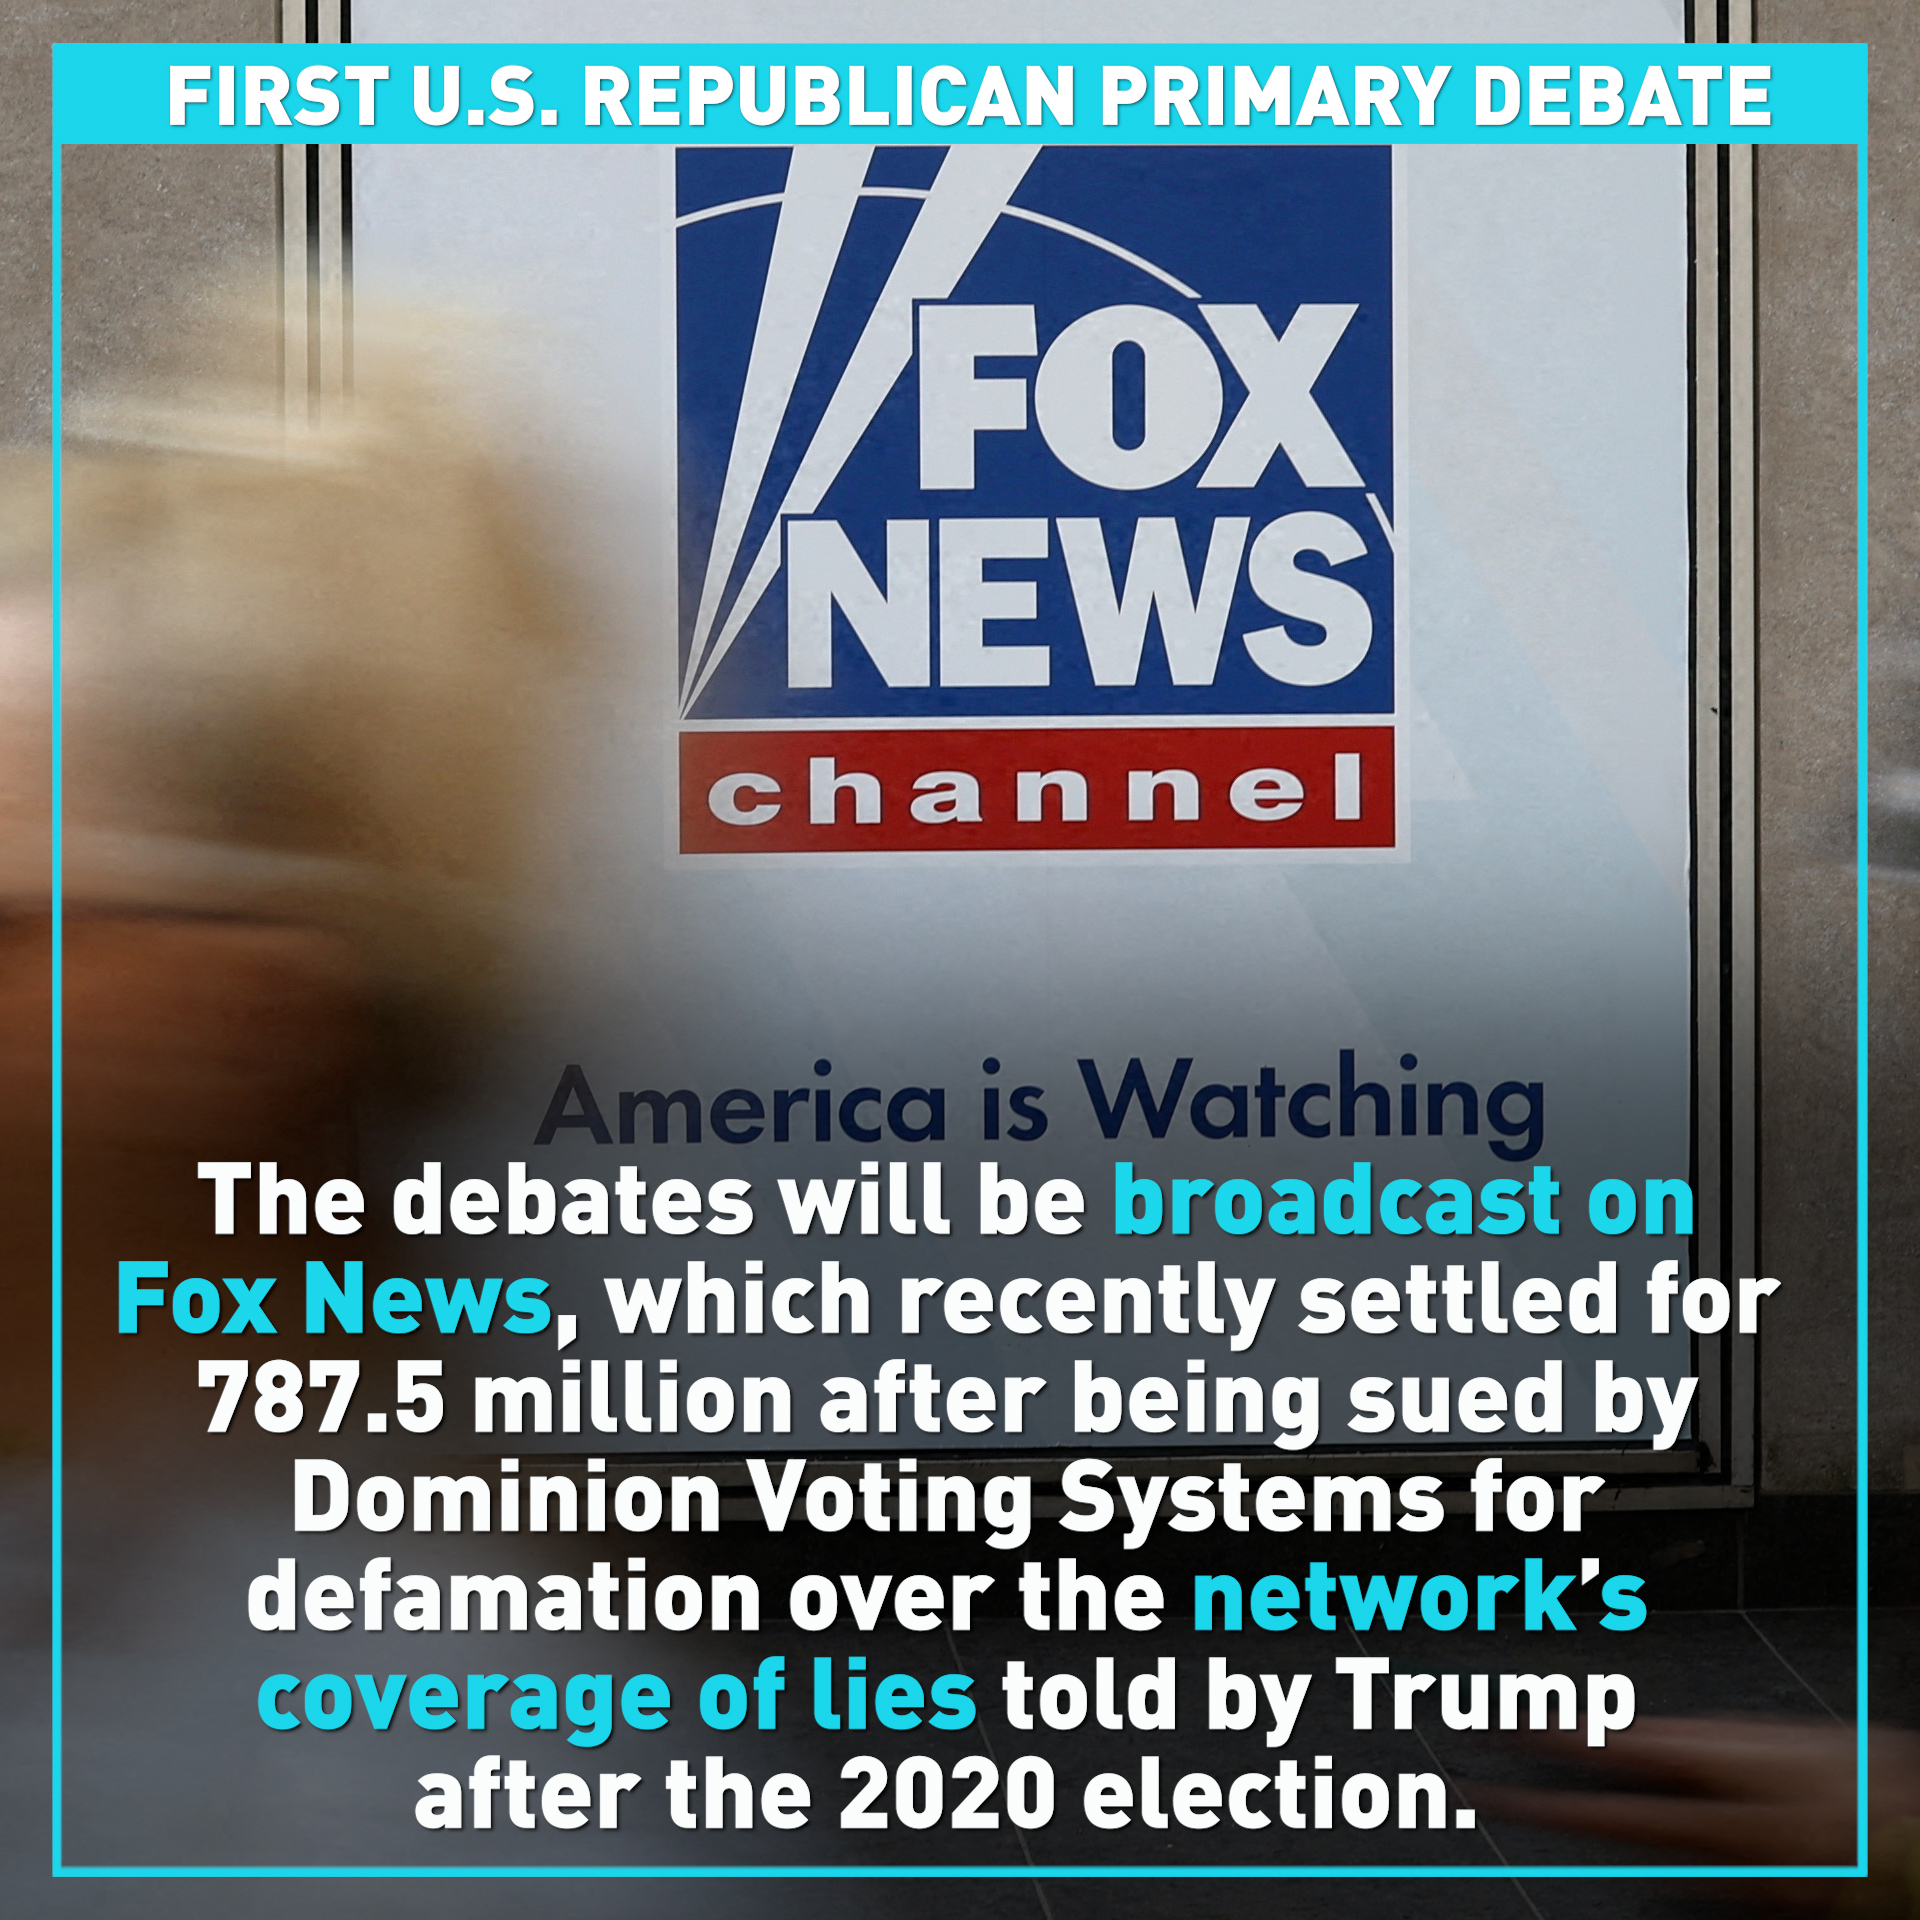 First Republican primary debate of 2024 U.S. election cycle 